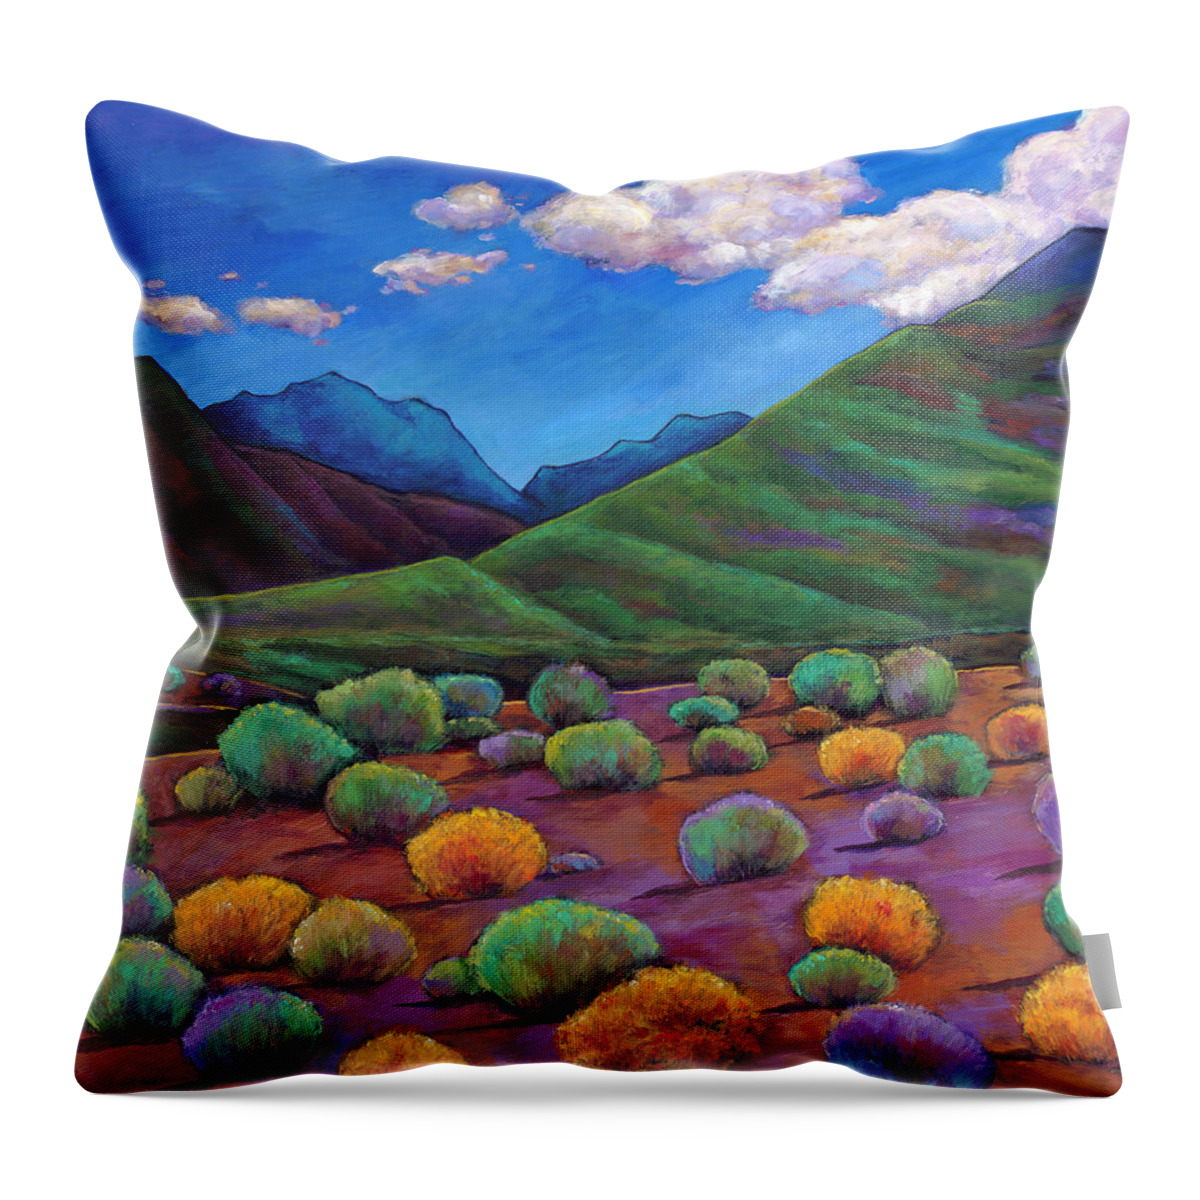 Arizona Throw Pillow featuring the painting Desert Valley by Johnathan Harris